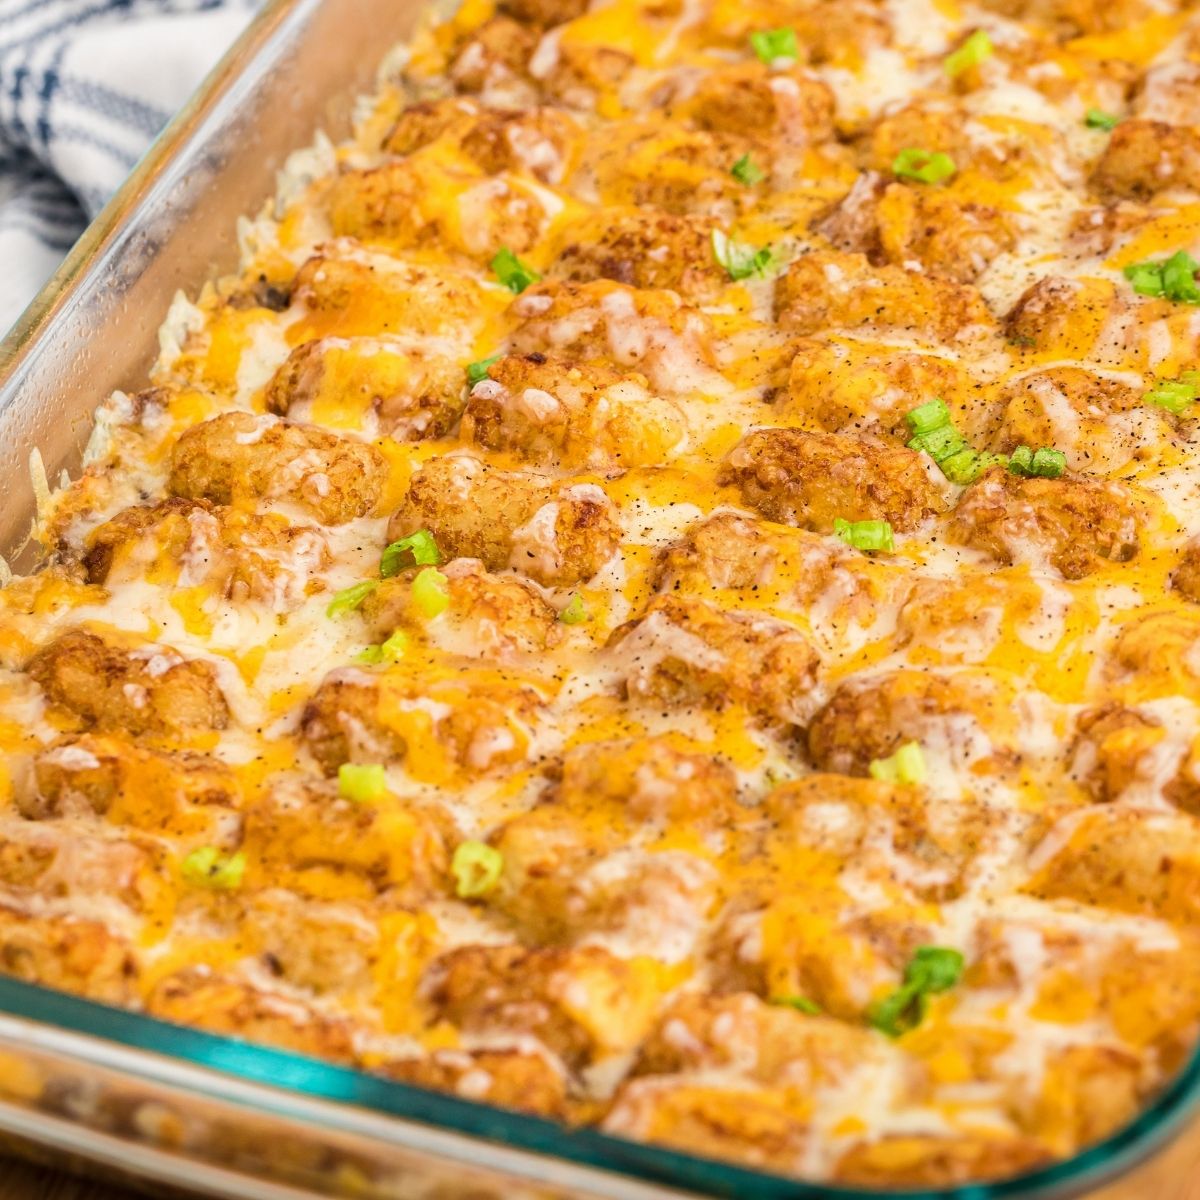 Cooked Tater Tot casserole in a baking dish.